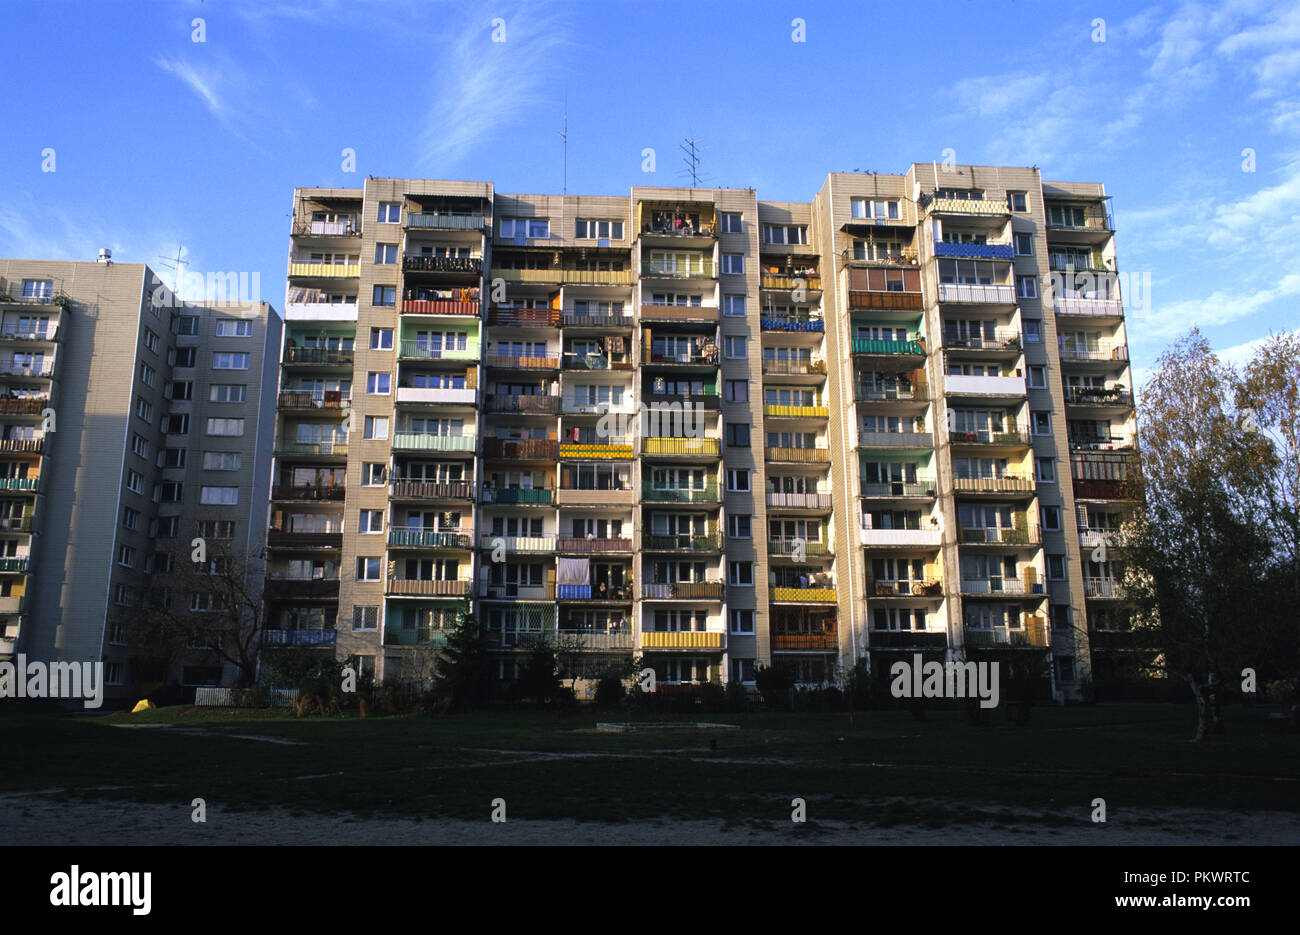 Soviet era residential housing block in the town of Wolomin in the eastern outskirts of Warsaw. November 2006 Stock Photo